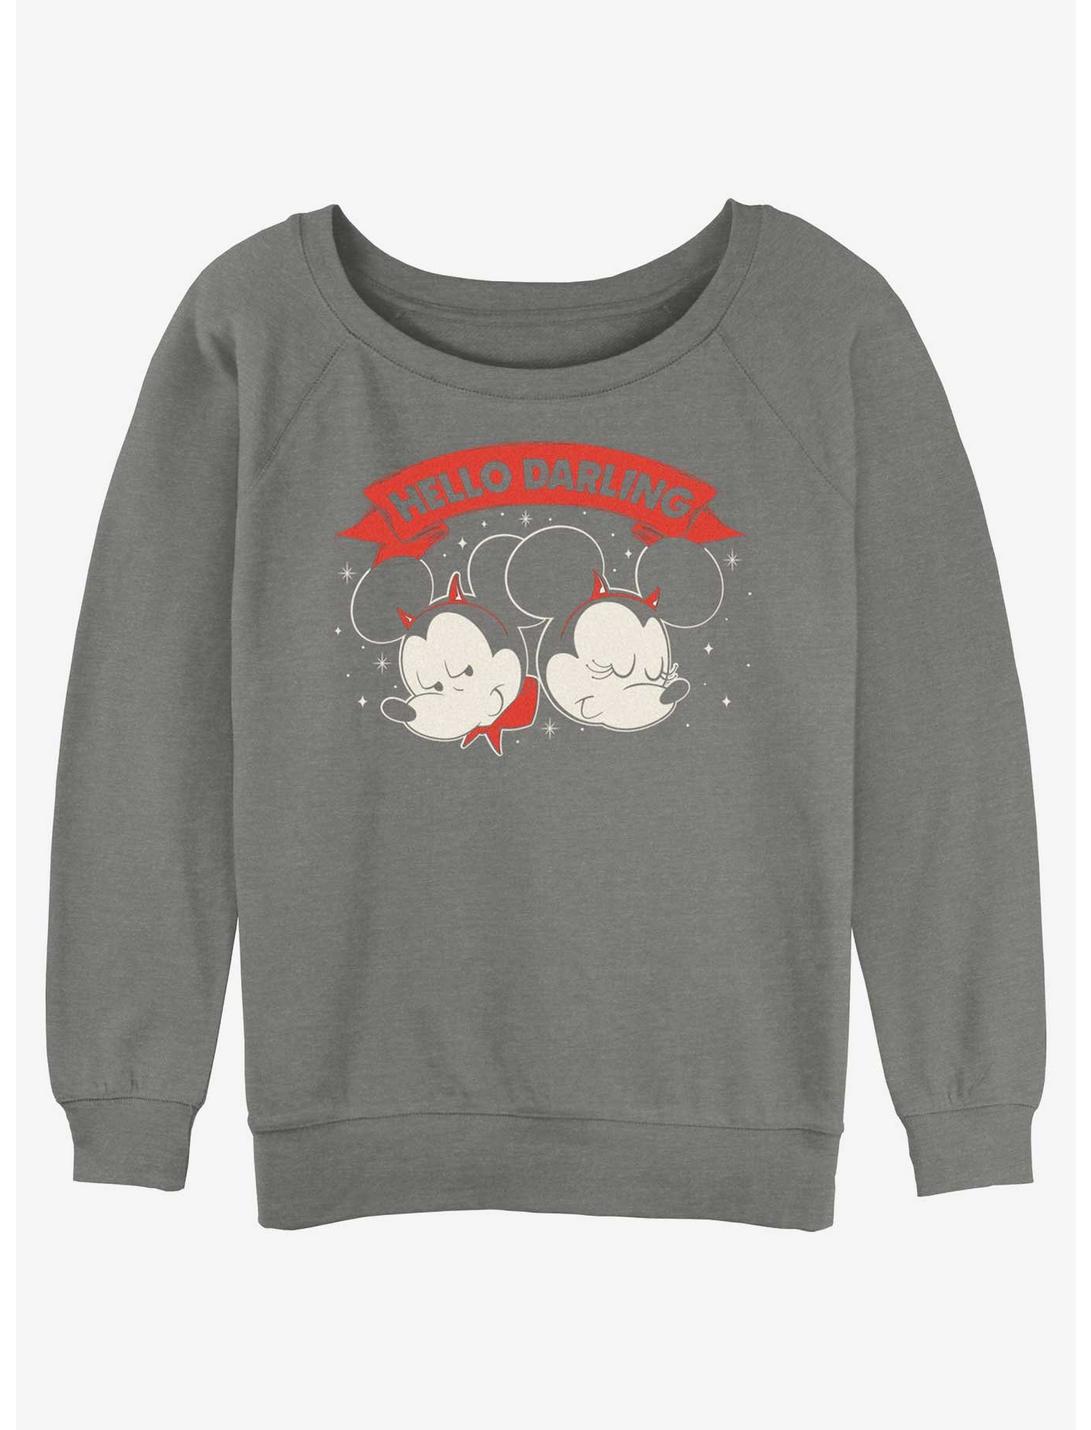 Disney Mickey Mouse & Minnie Mouse Hello Darling Girls Slouchy Sweatshirt, GRAY HTR, hi-res